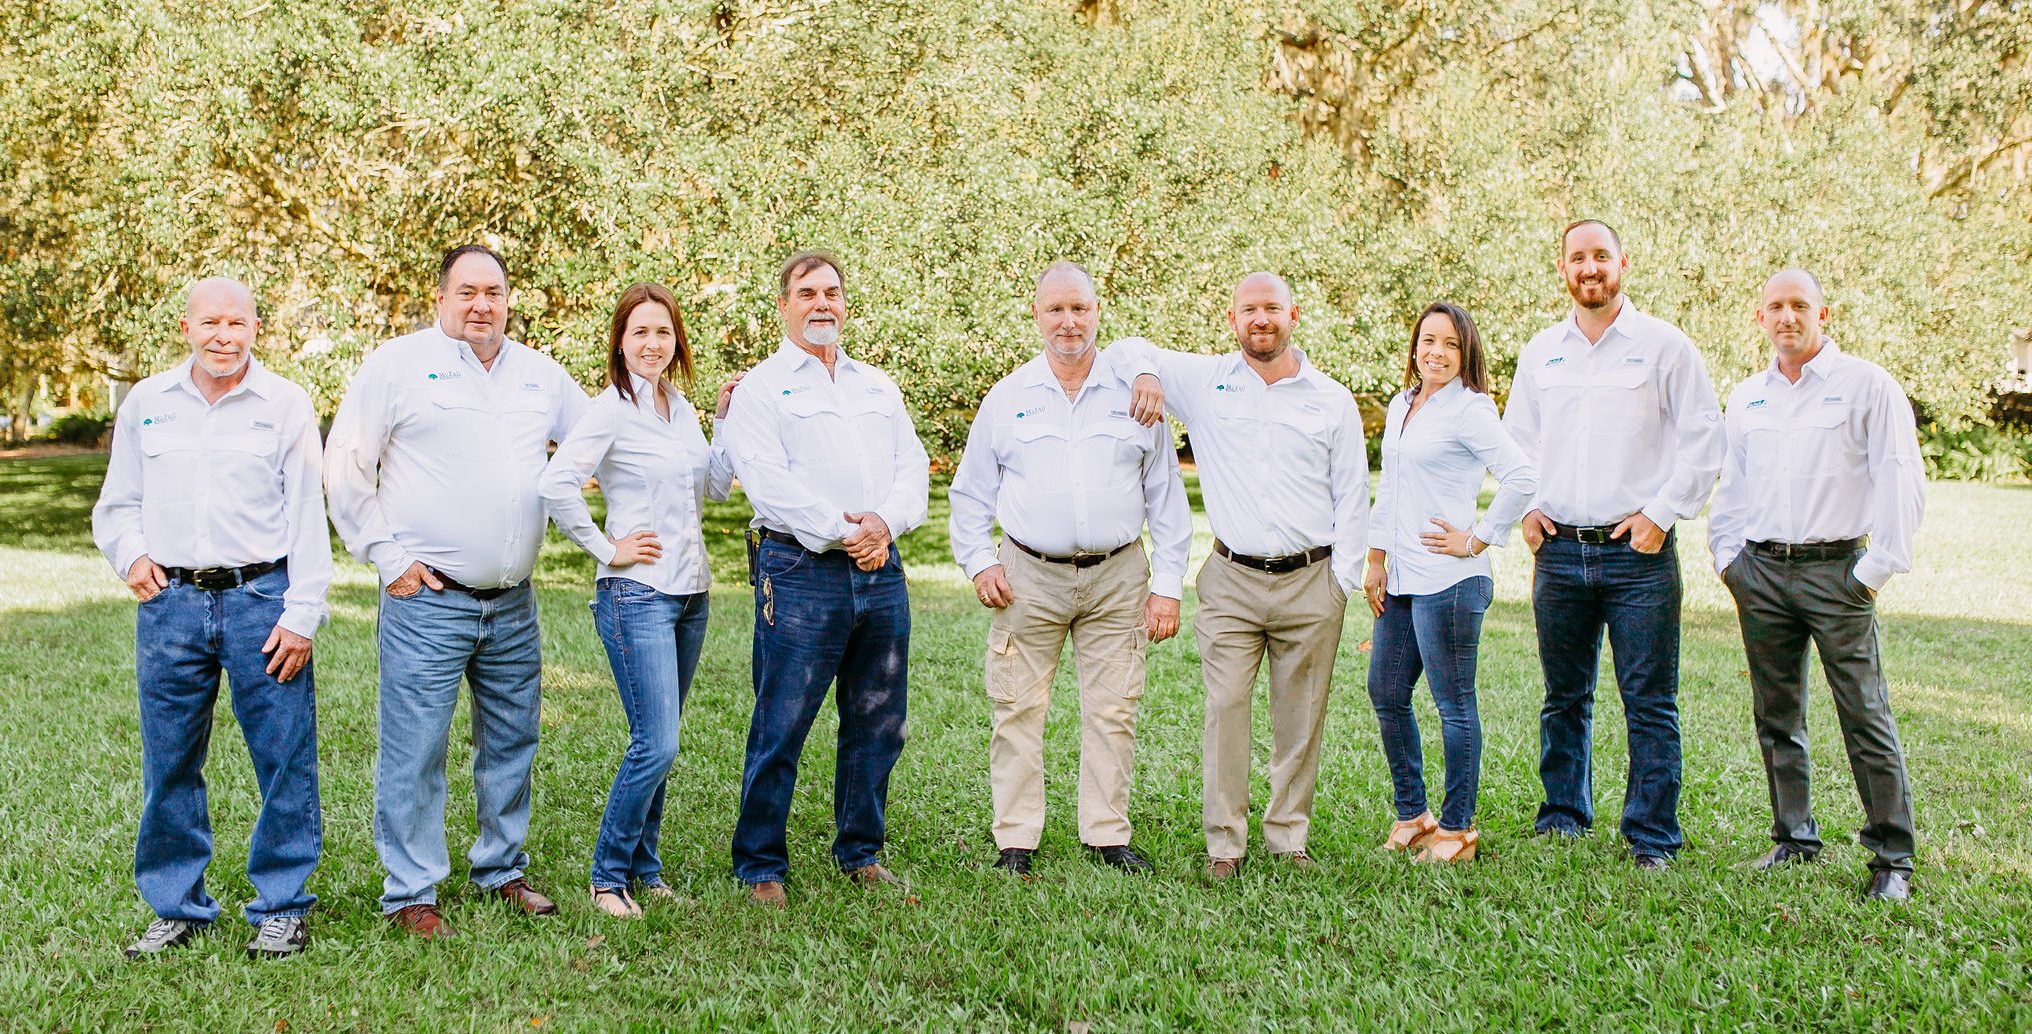 A picture of the entire McFall Roofing, a roofing company, wearing white shirts